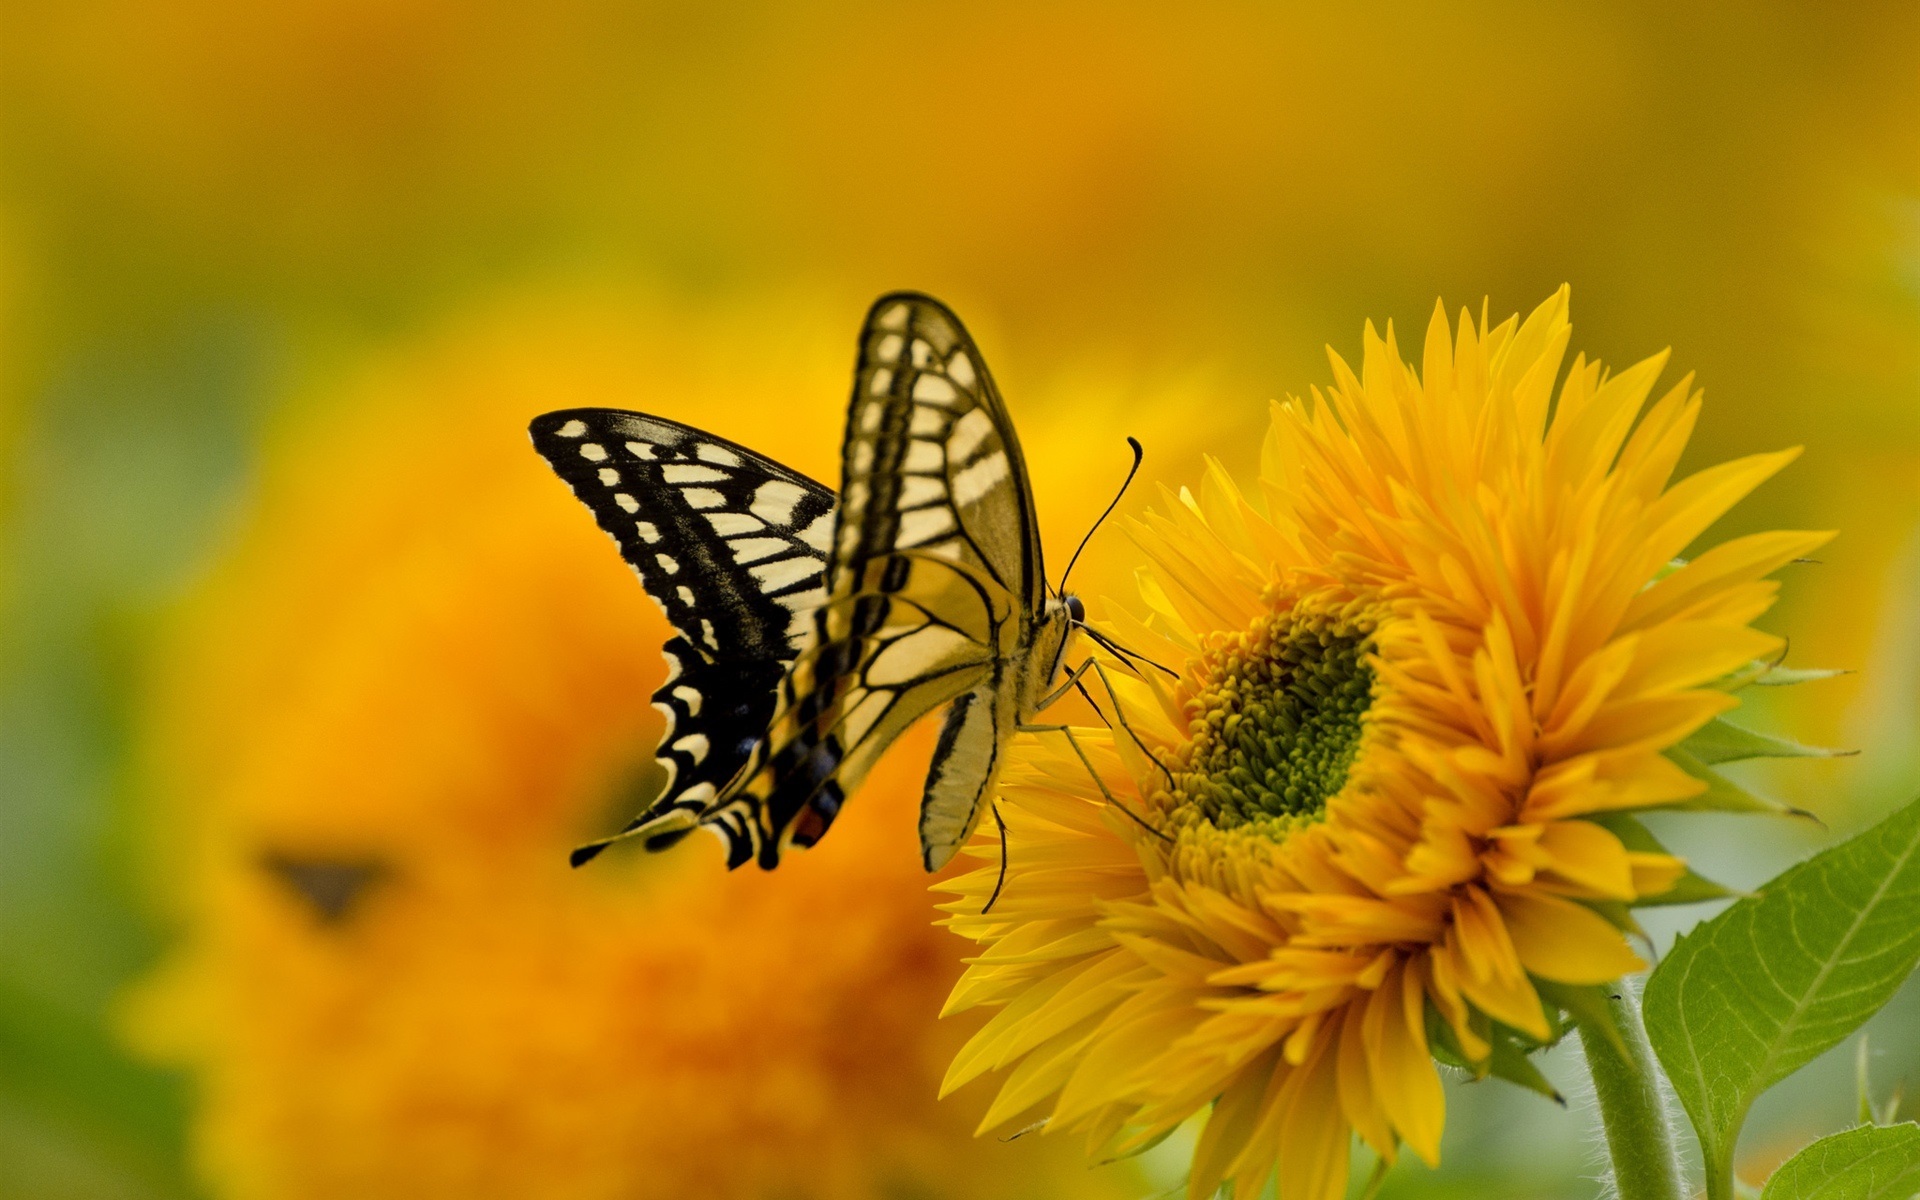 Image: Butterfly, wings, color, flower, sunflower, yellow, sits, collects, nectar, blur